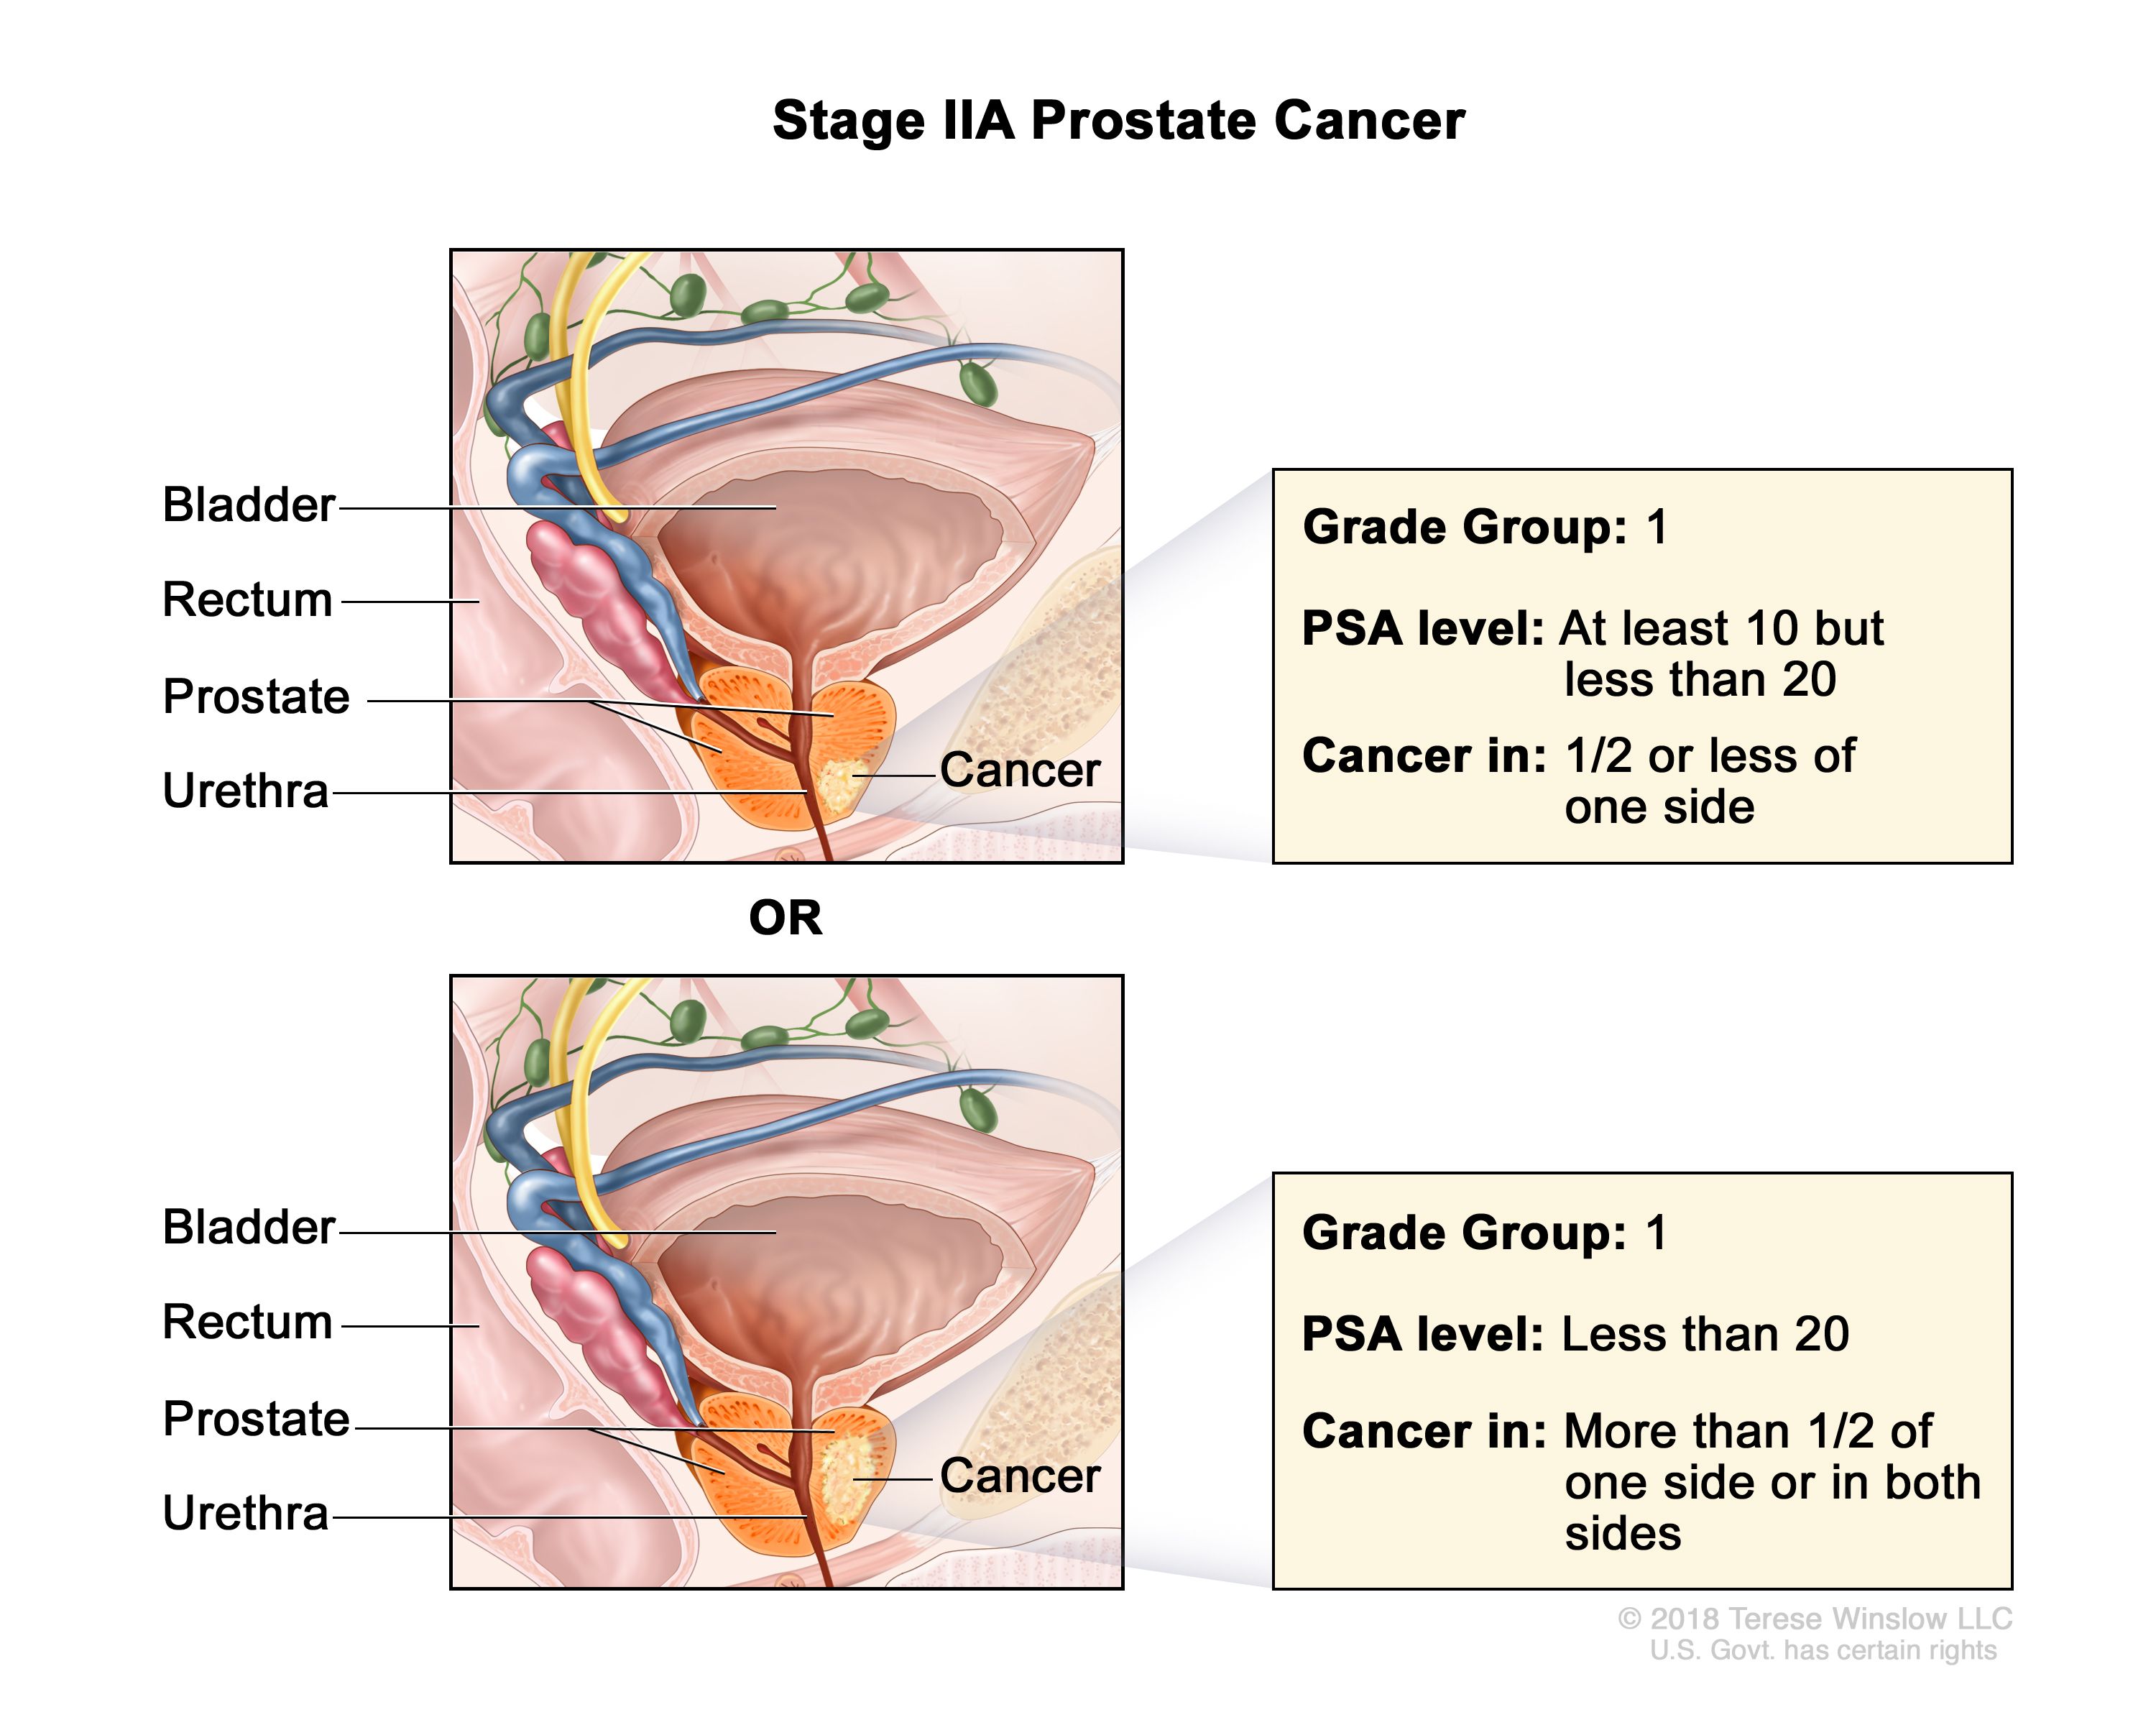 Proton Radiation Therapy for the Treatment of Patients With High Risk Prostate Cancer